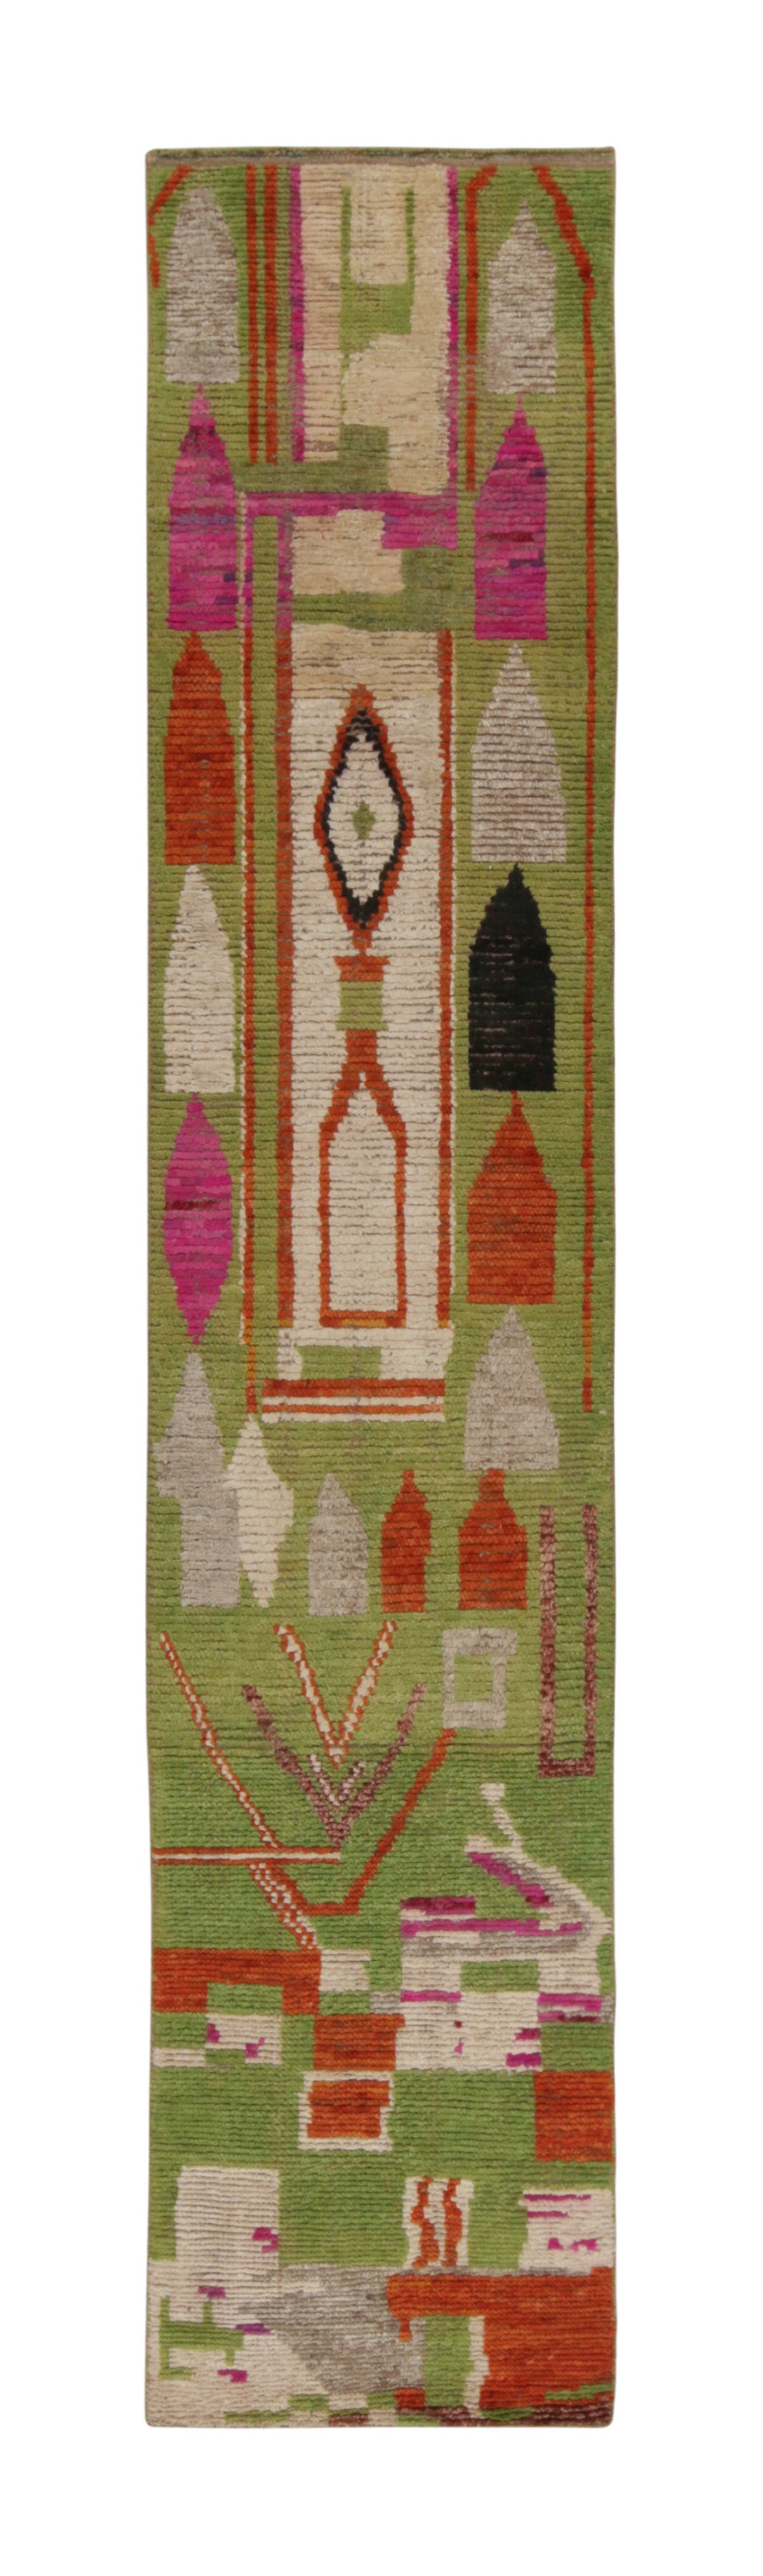 Rug & Kilim’s Moroccan Style Runner in Green with Vibrant Tribal Patterns